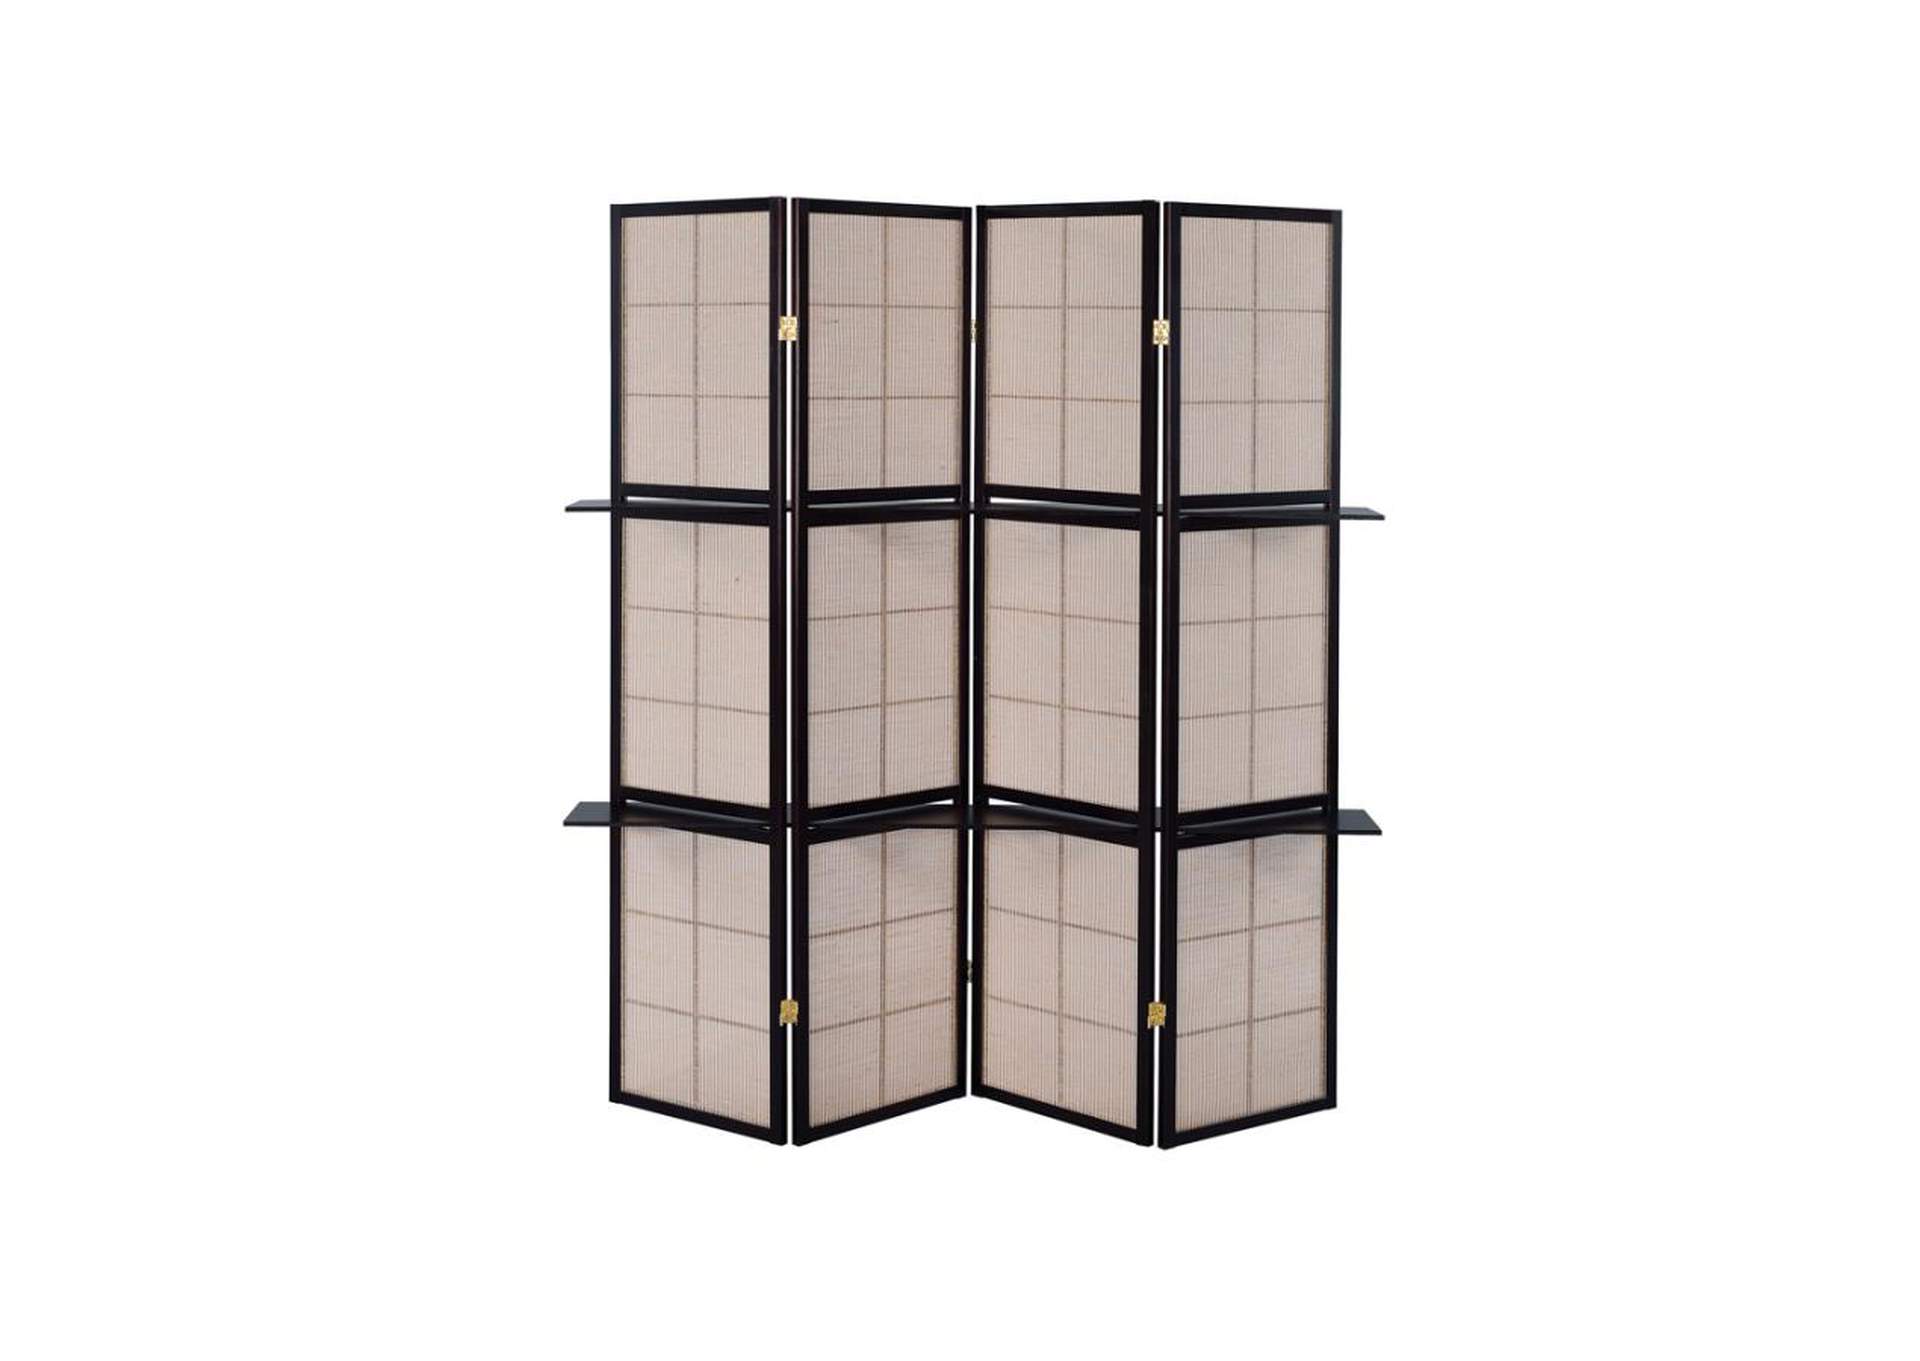 Iggy 4-panel Folding Screen with Removable Shelves Tan and Cappuccino,Coaster Furniture